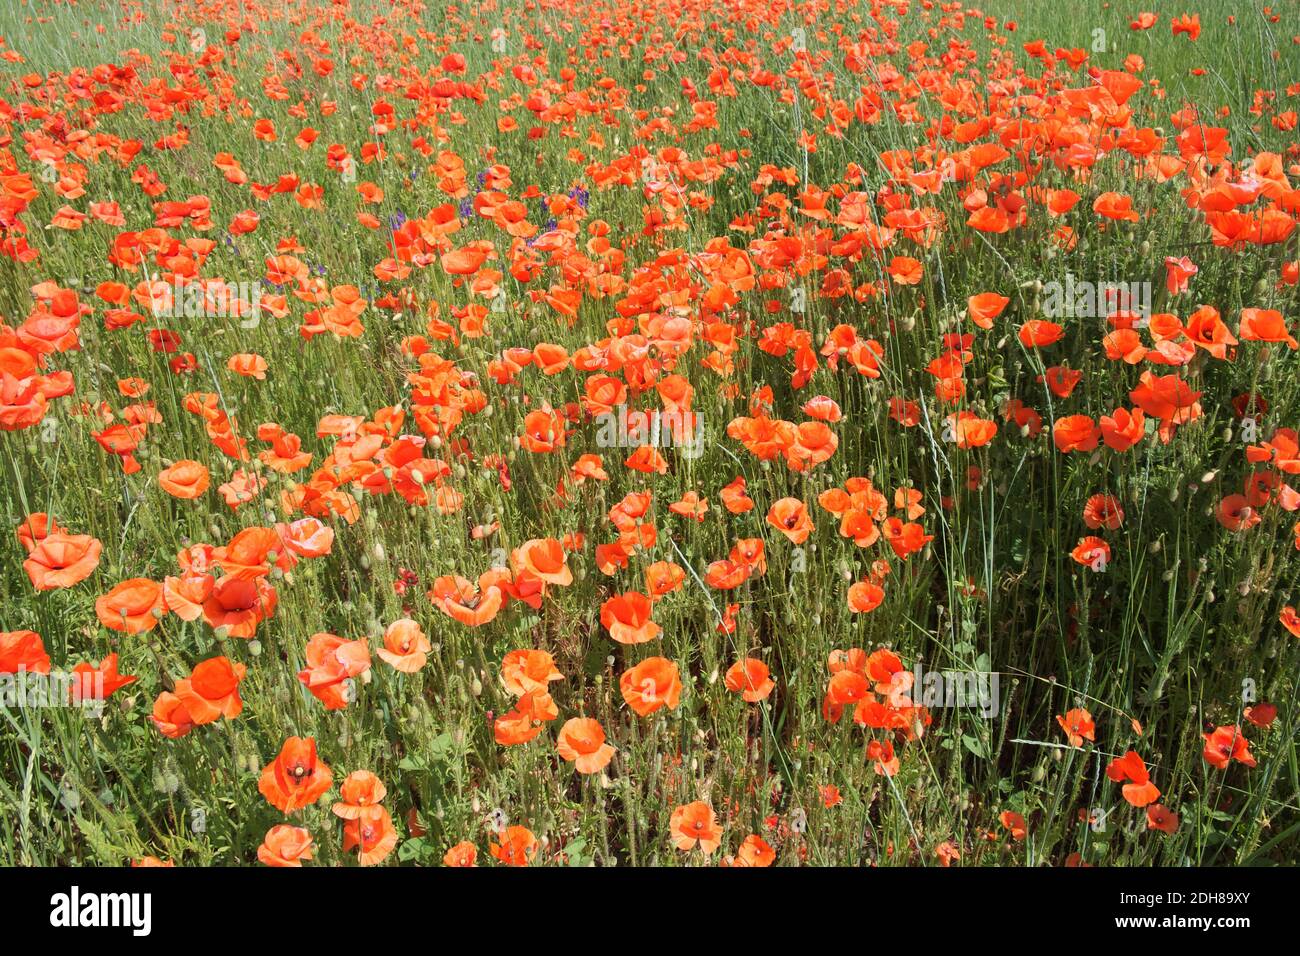 Poppy flowers field. Rural landscape with red wildflowers. Many red poppies in the field. Red wildflowers. Stock Photo